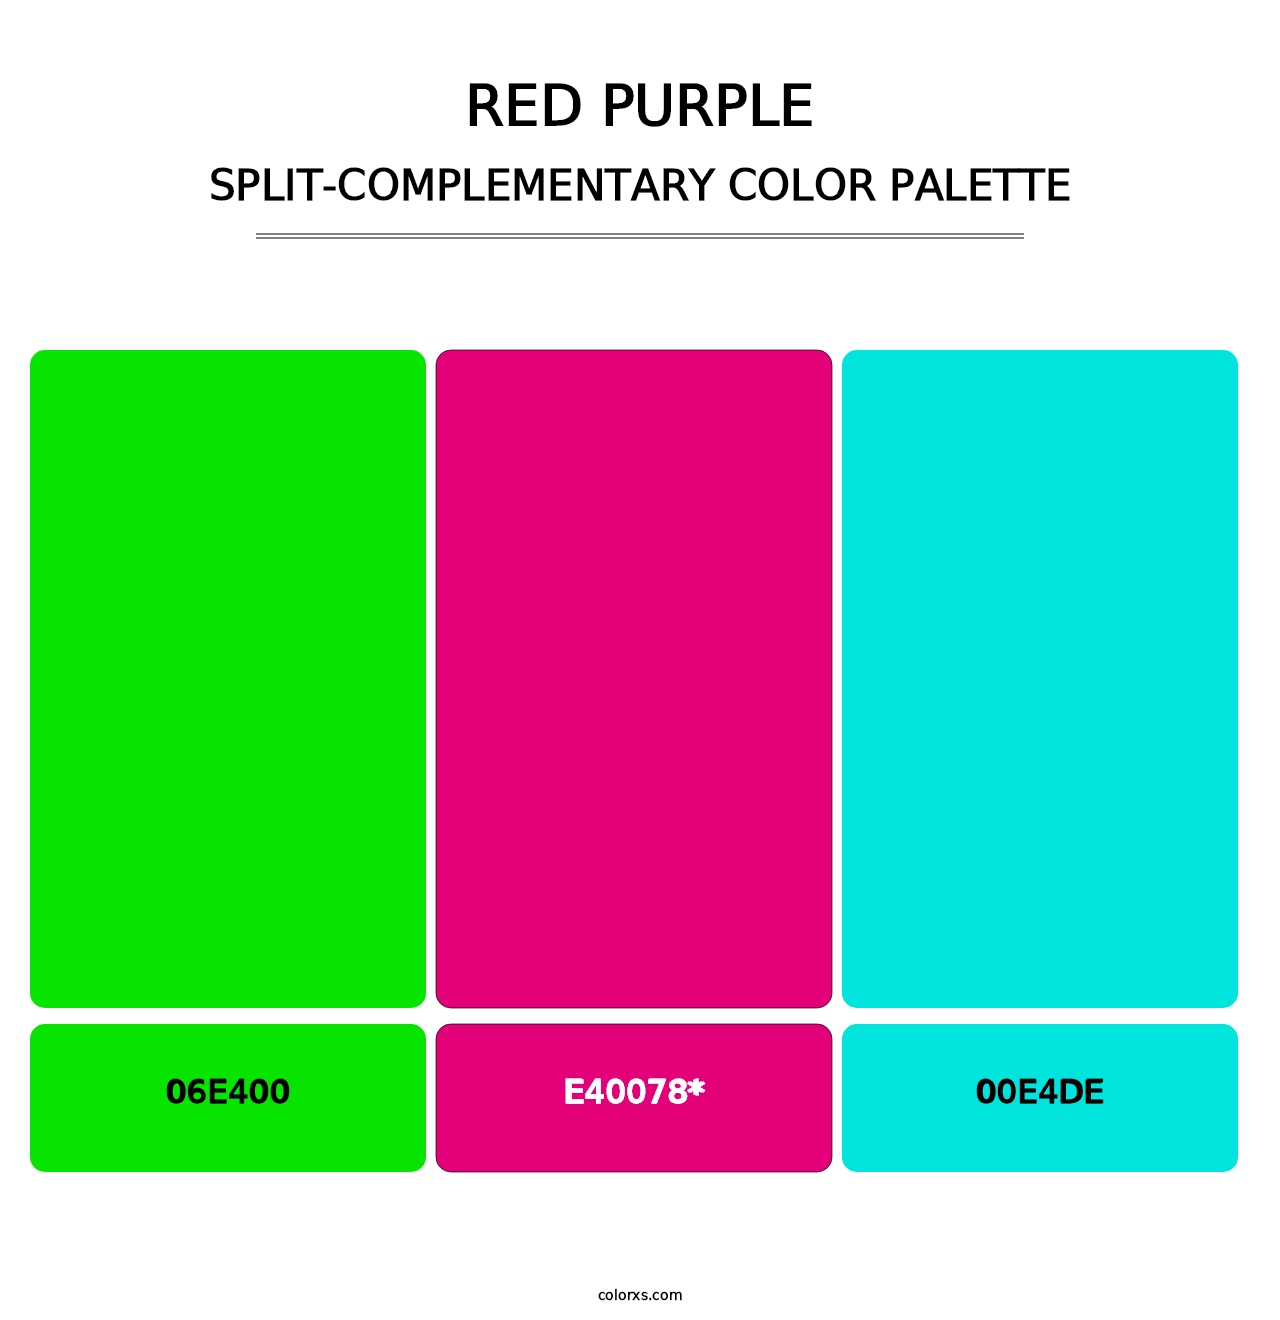 Red Purple - Split-Complementary Color Palette